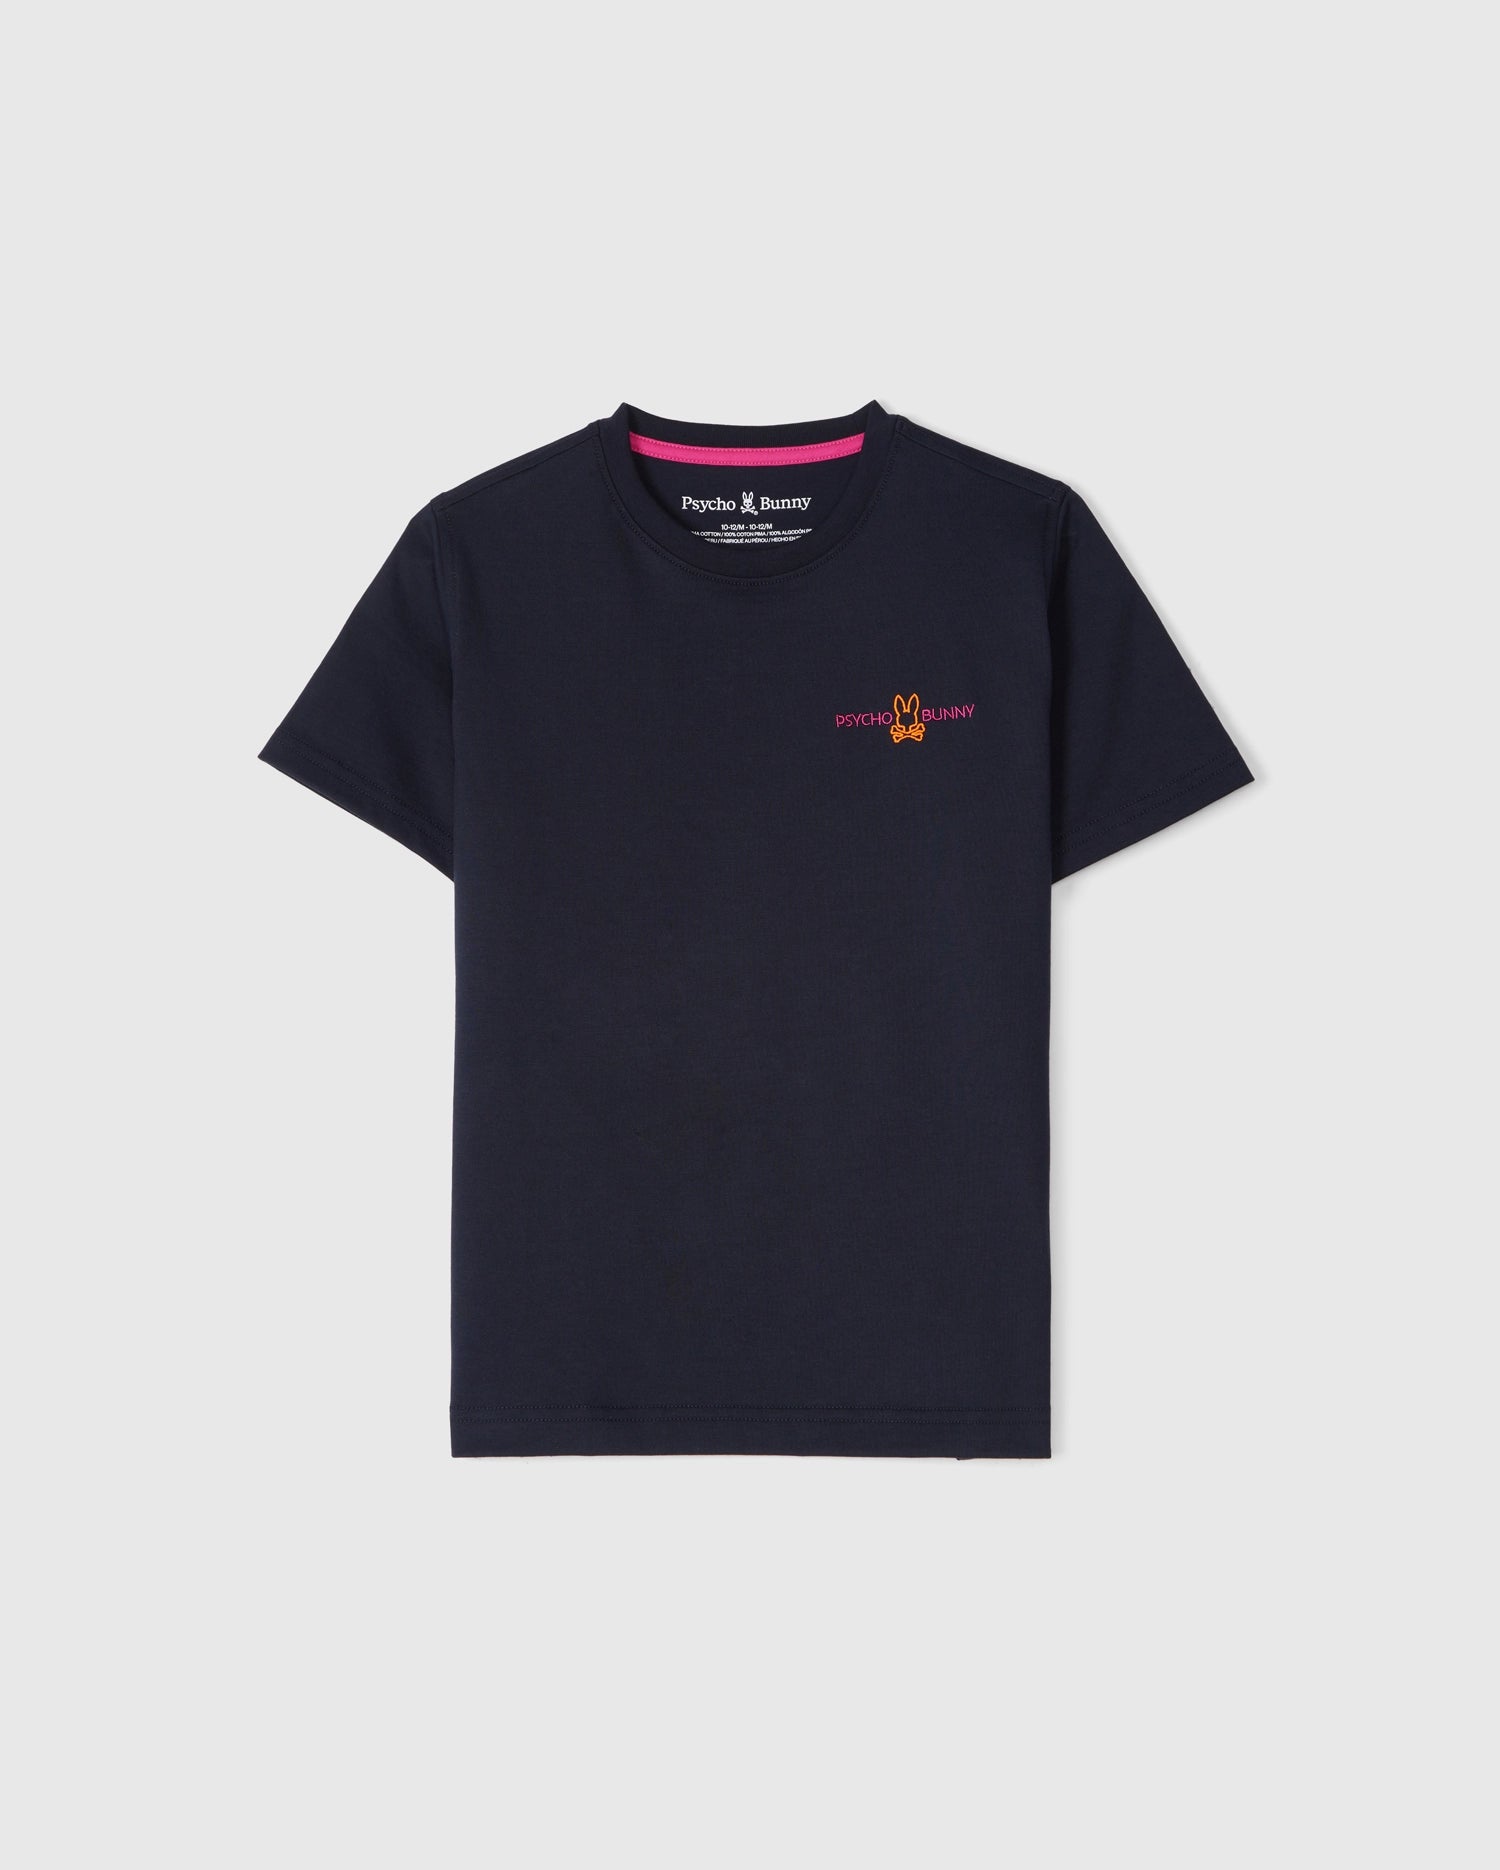 A KIDS WASTERLO BACK GRAPHIC TEE - B0U317B2TS from Psycho Bunny, navy blue with a round neck and short sleeves, made from soft Peruvian Pima cotton and featuring a small, colorful embroidered chest logo on the left. The logo depicts a stylized rabbit head with 